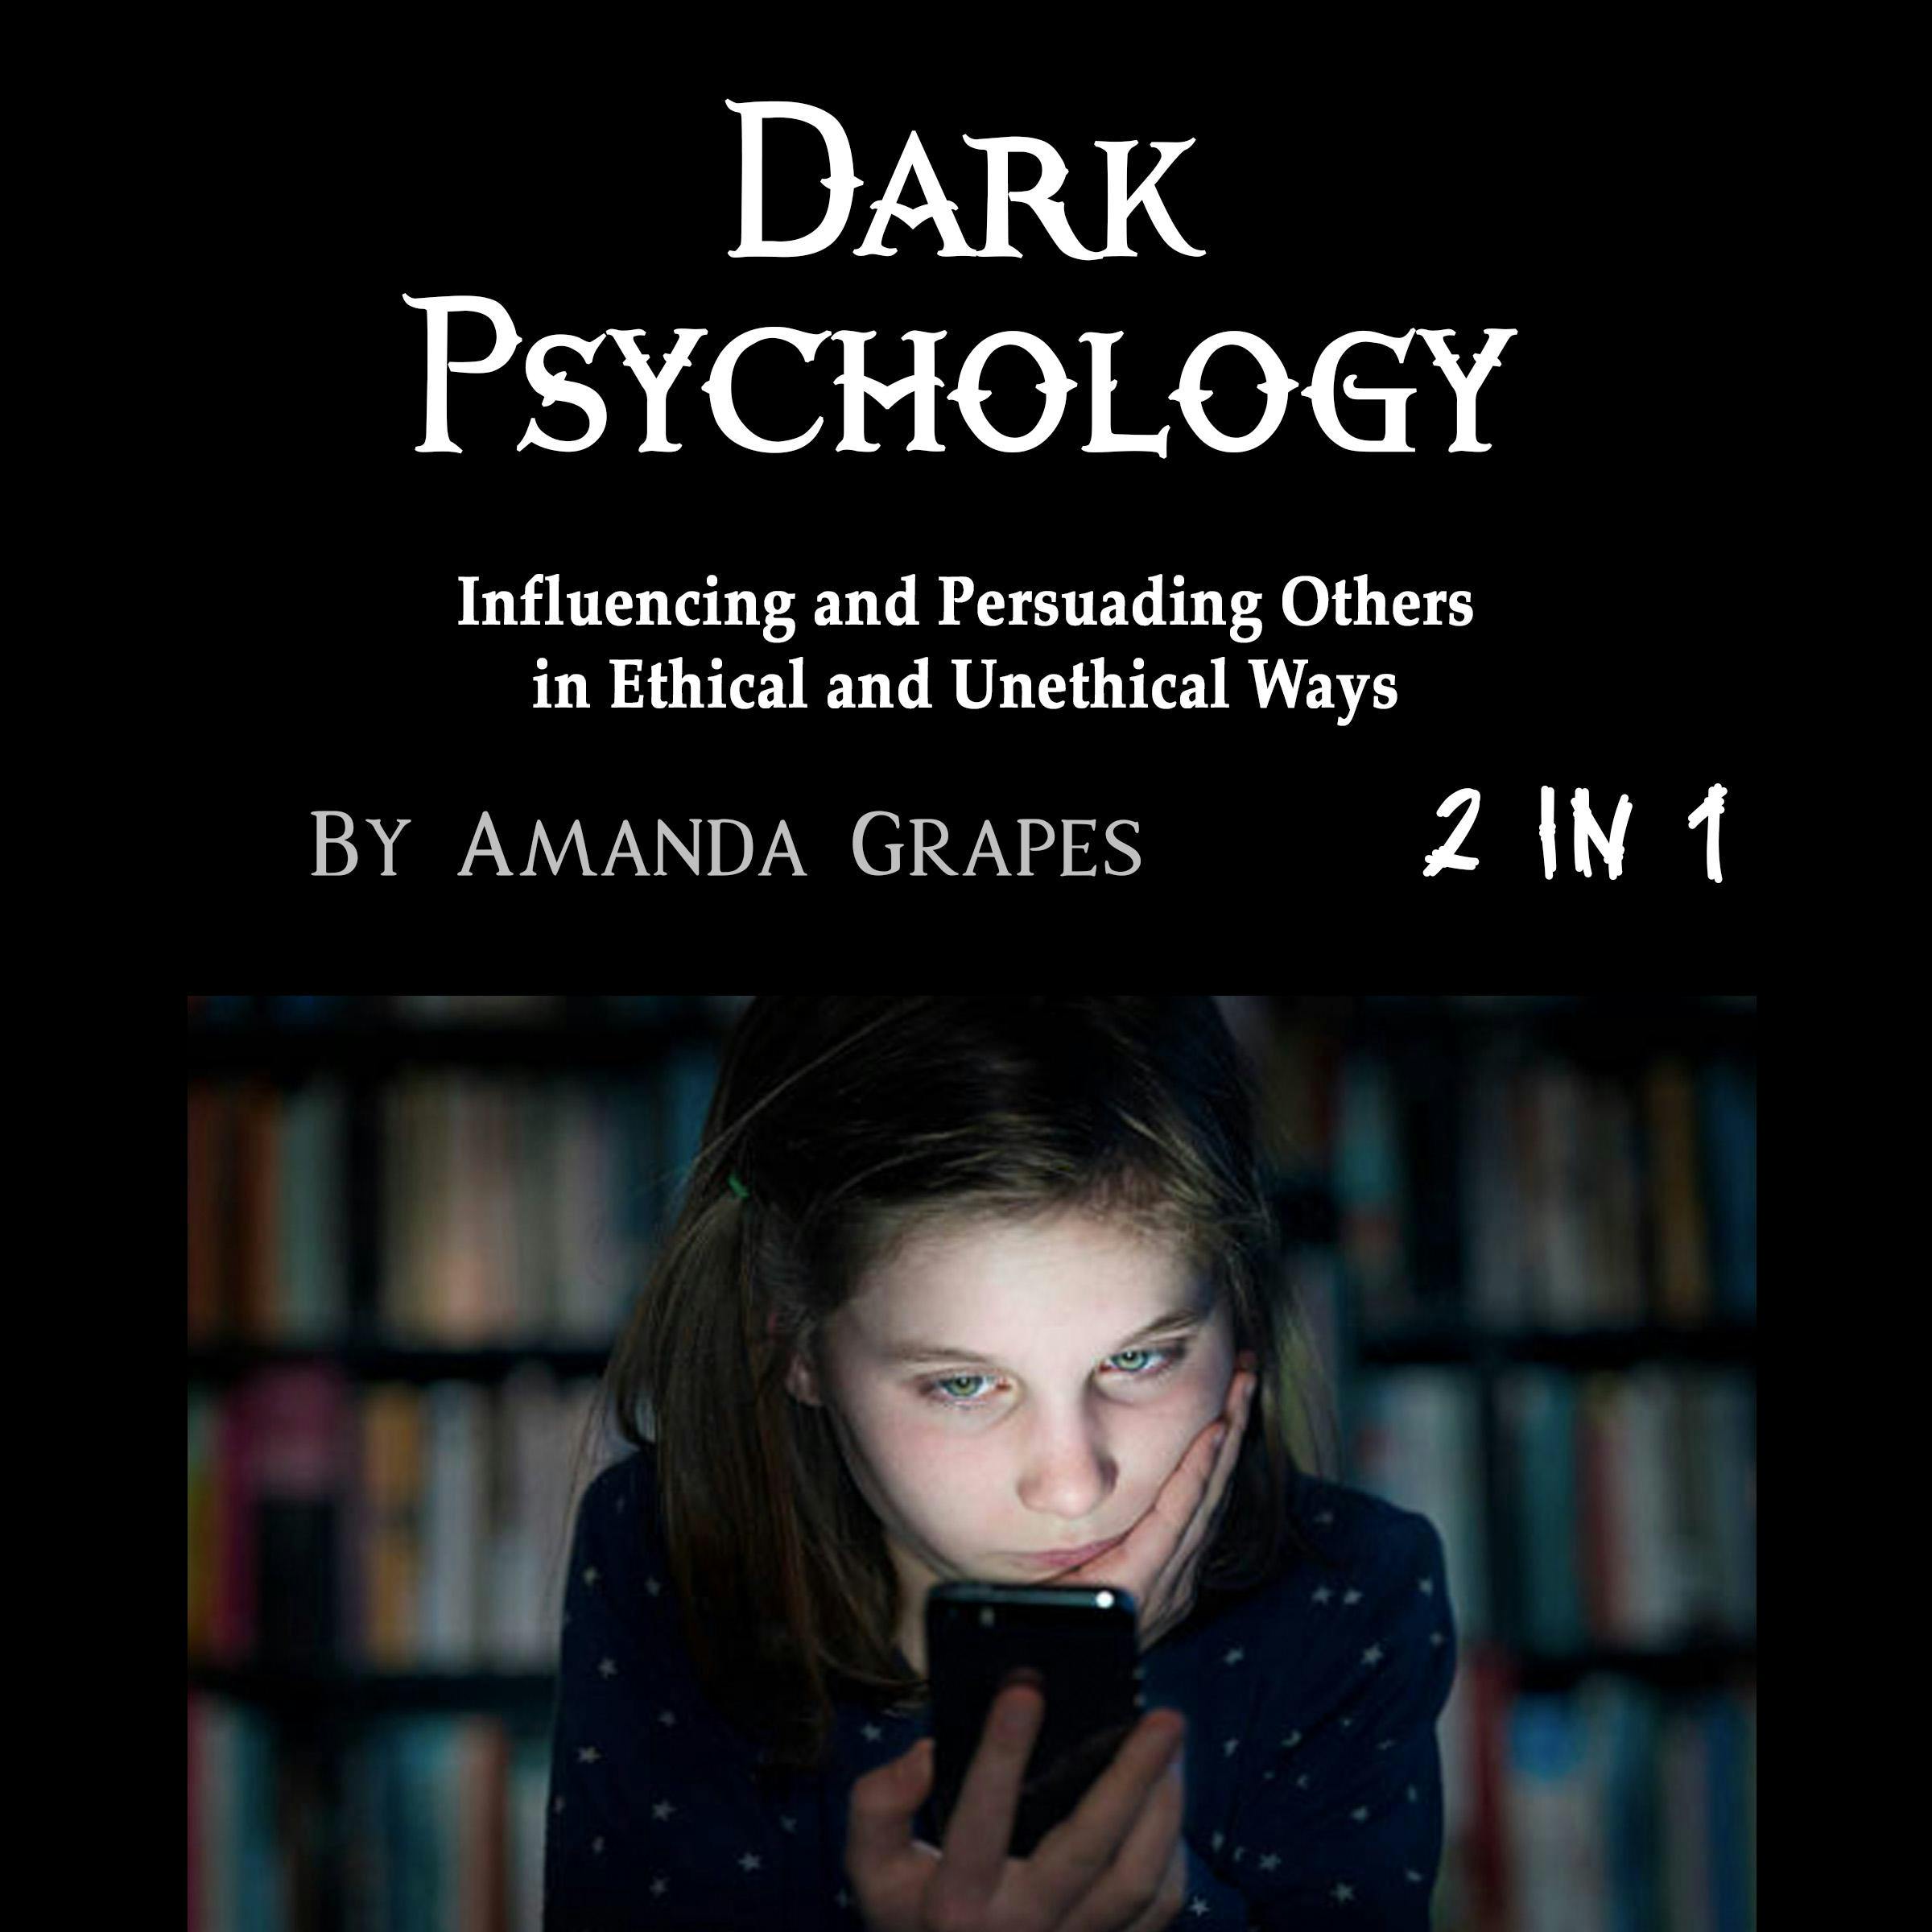 Dark Psychology: Influencing and Persuading Others in Ethical and Unethical Ways - Amanda Grapes